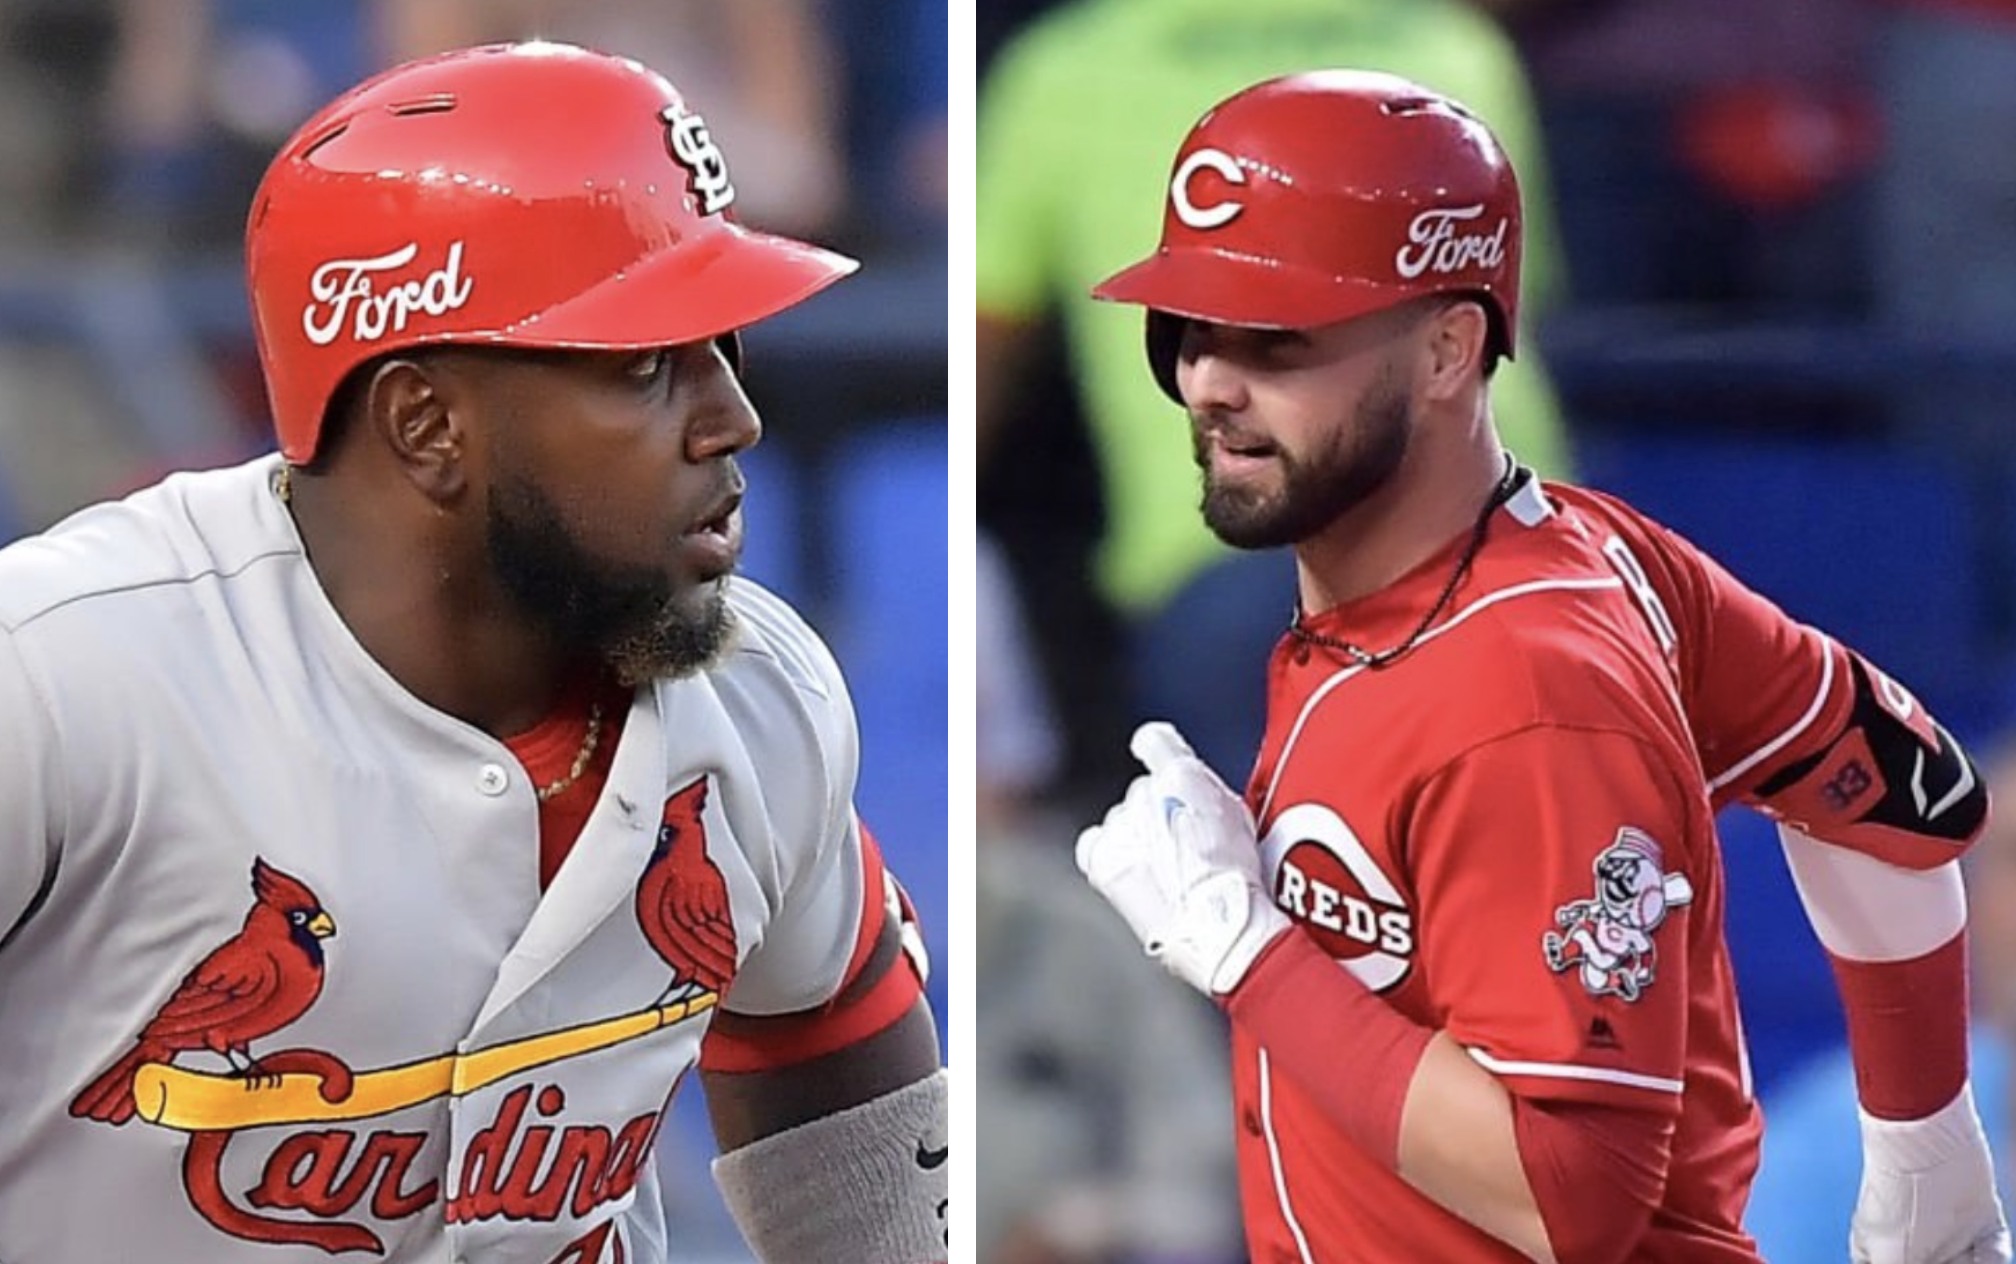 MLB to allow advertising on jerseys and helmets amid new CBA; fans